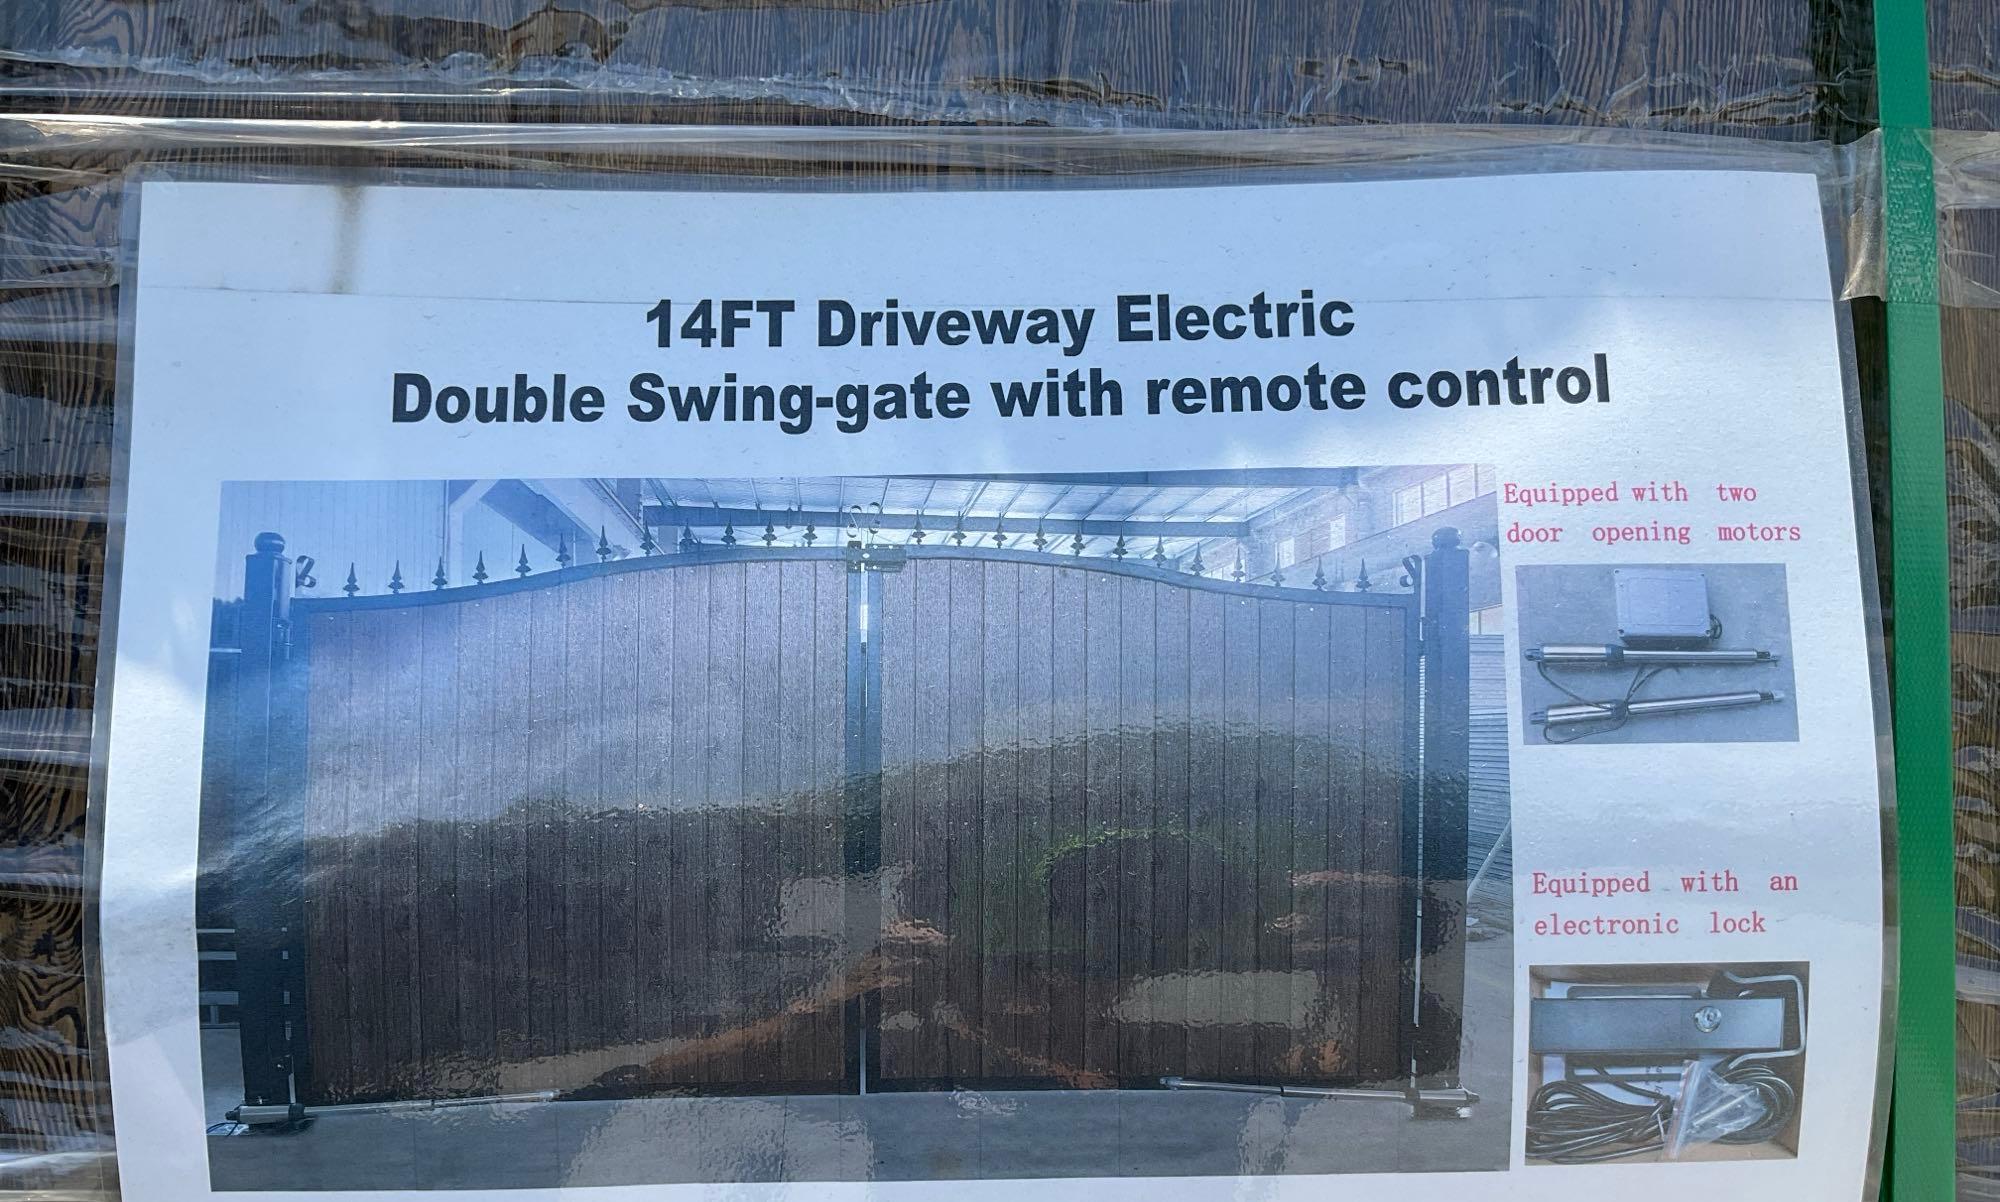 UNUSED 14FT DRIVEWAY ELECTRIC DOUBLE SWING GATE, 2 PIECES PER SET, REMOTE CONTROL INCLUDED ( PLEASE